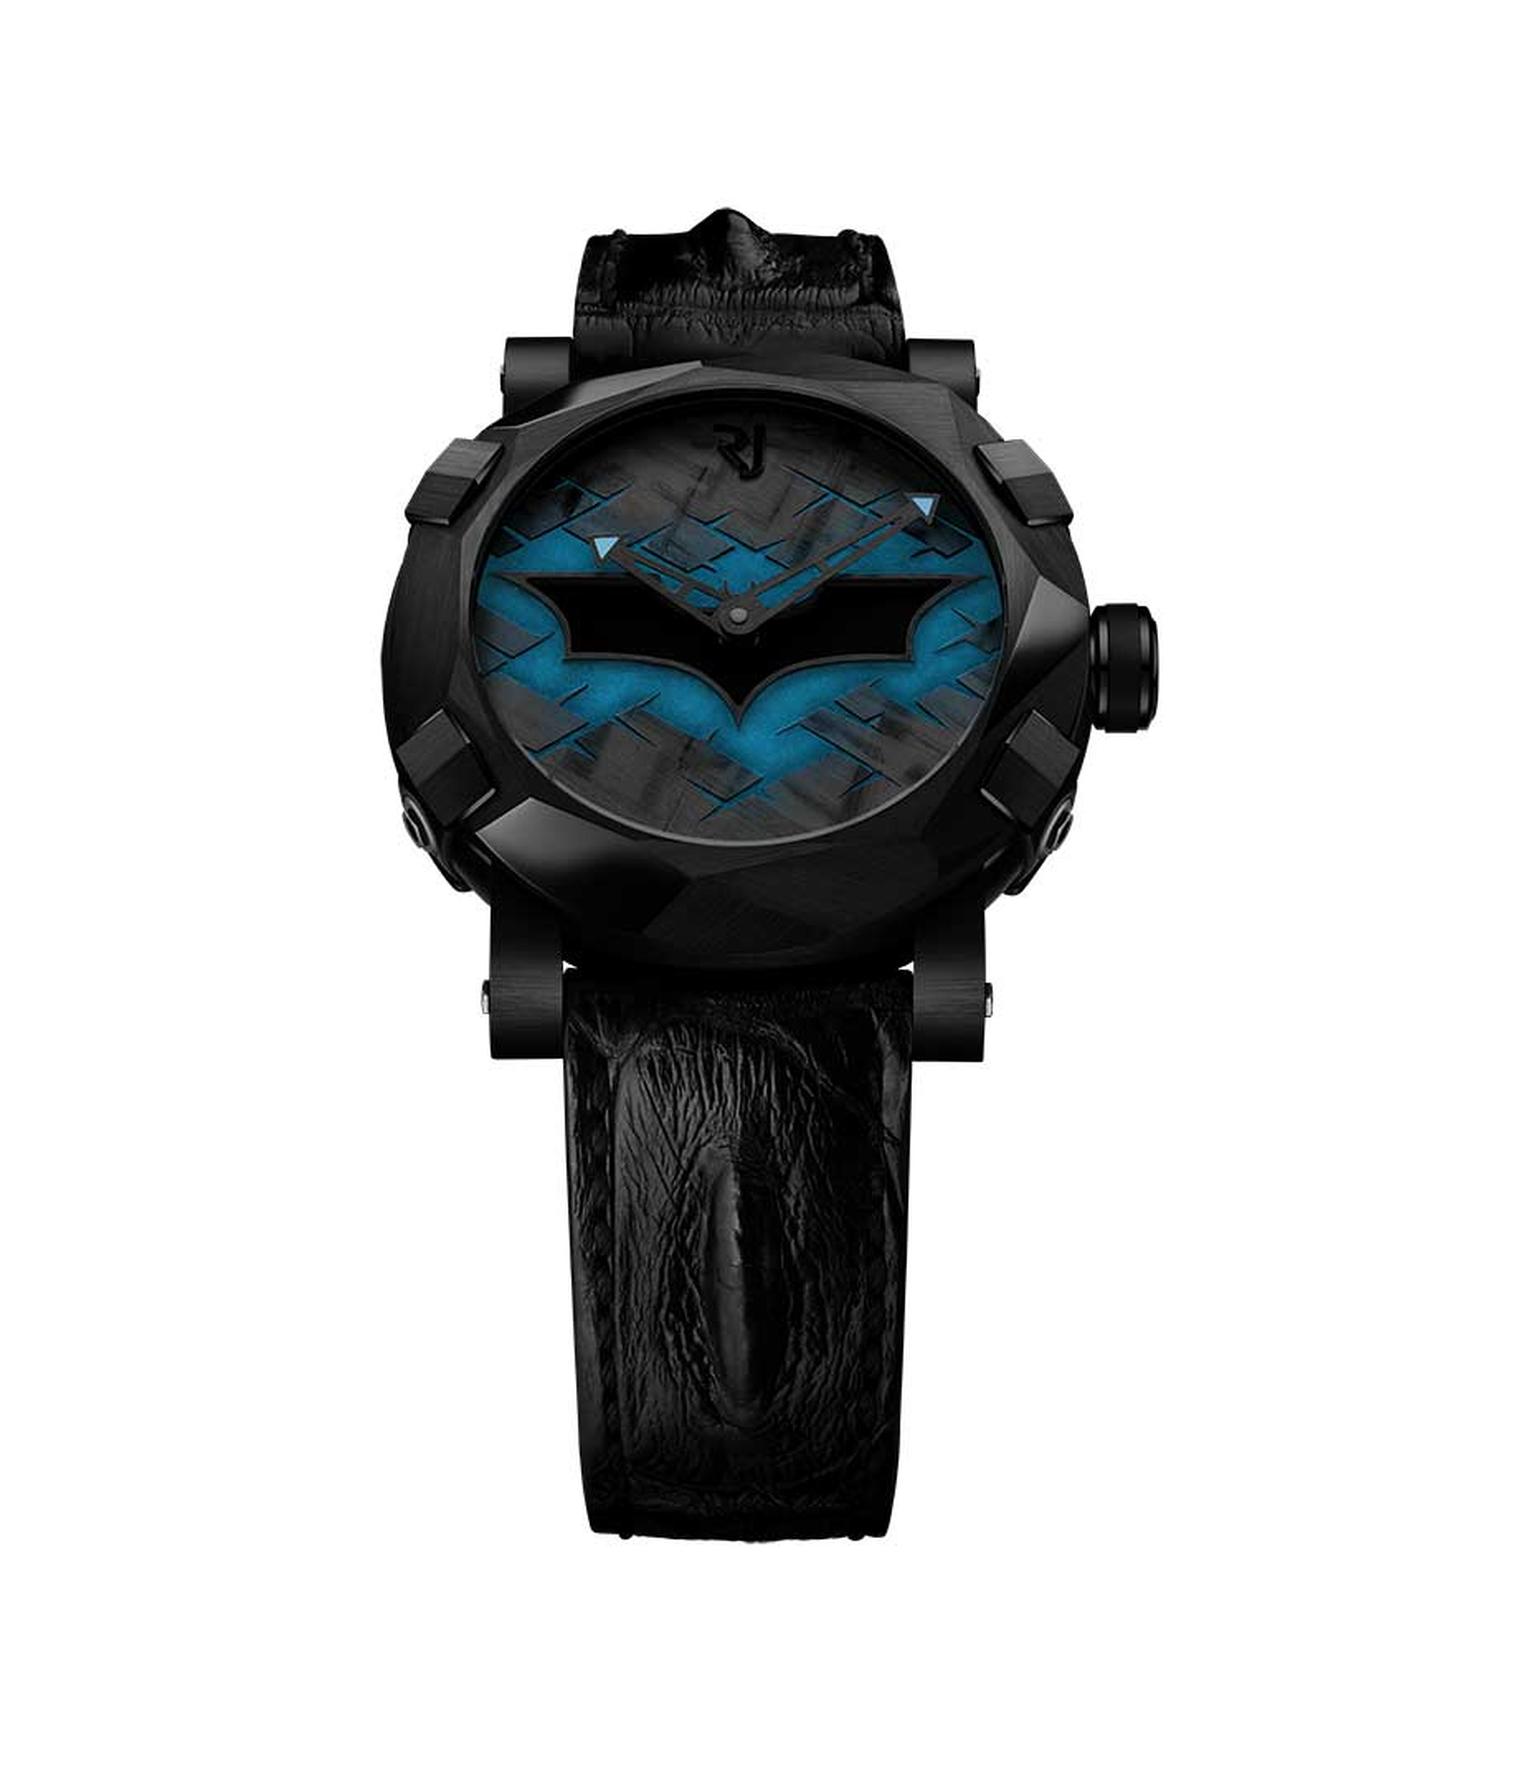 Swiss watchmaker Romain Jerome is celebrating the 75th anniversary of the Dark Knight with the RJ-Romain Jerome Batman-DNA watch, which recreates the angular contours of the Batmobile on its dramatic 46mm black PVD-coated case watch.